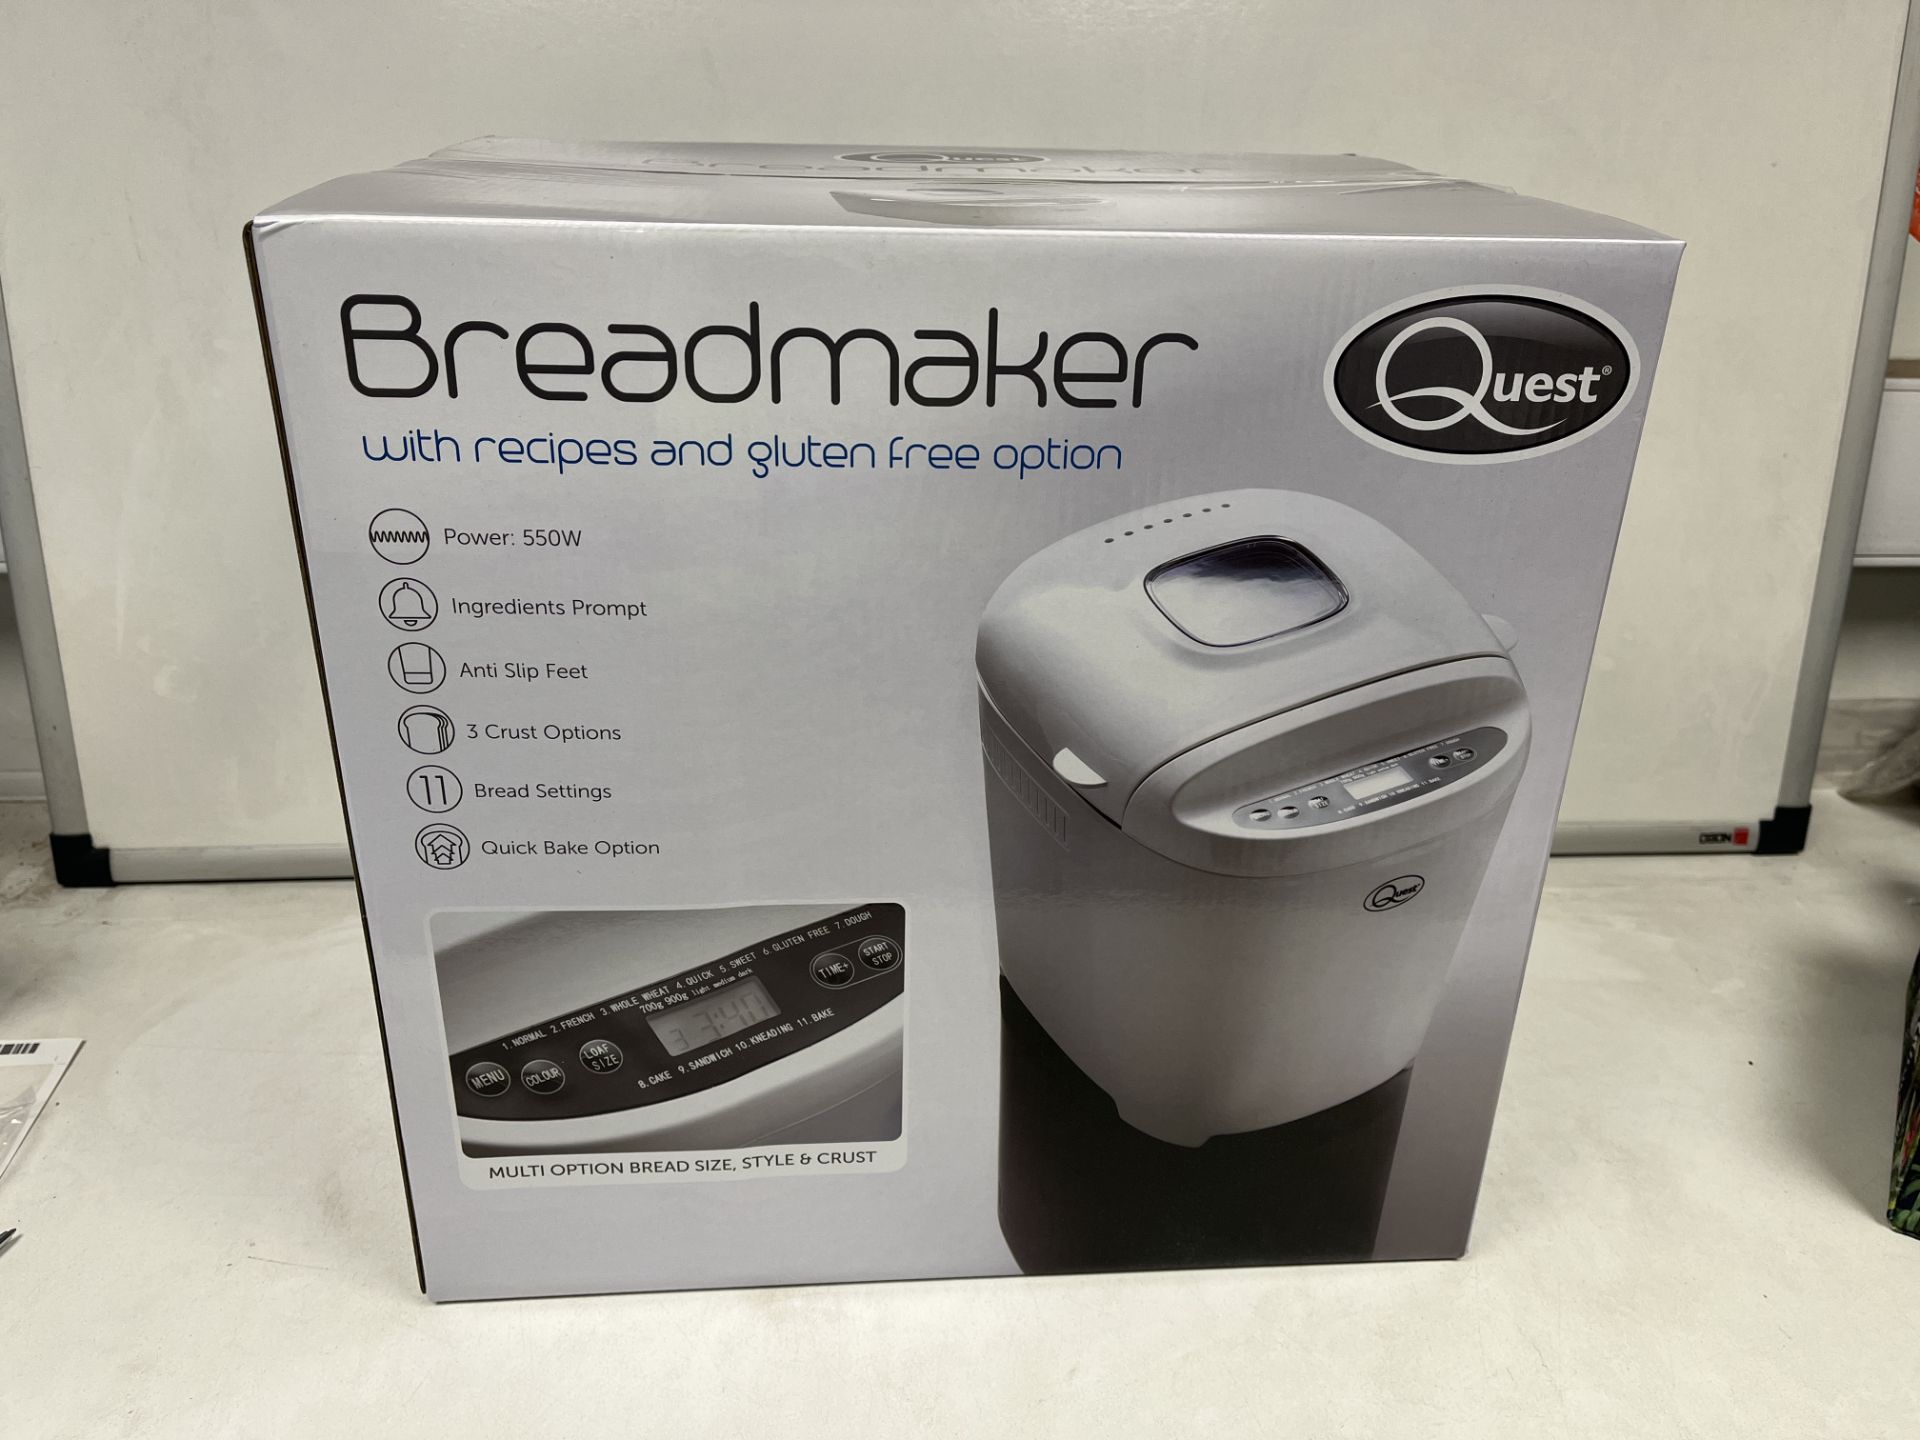 BRAND NEW QUEST 550W BREAD MAKER WITH ANTI SLIP FEET, 3 CRUST OPTIONS, BREAD SETTINGS, QUICK BAKE